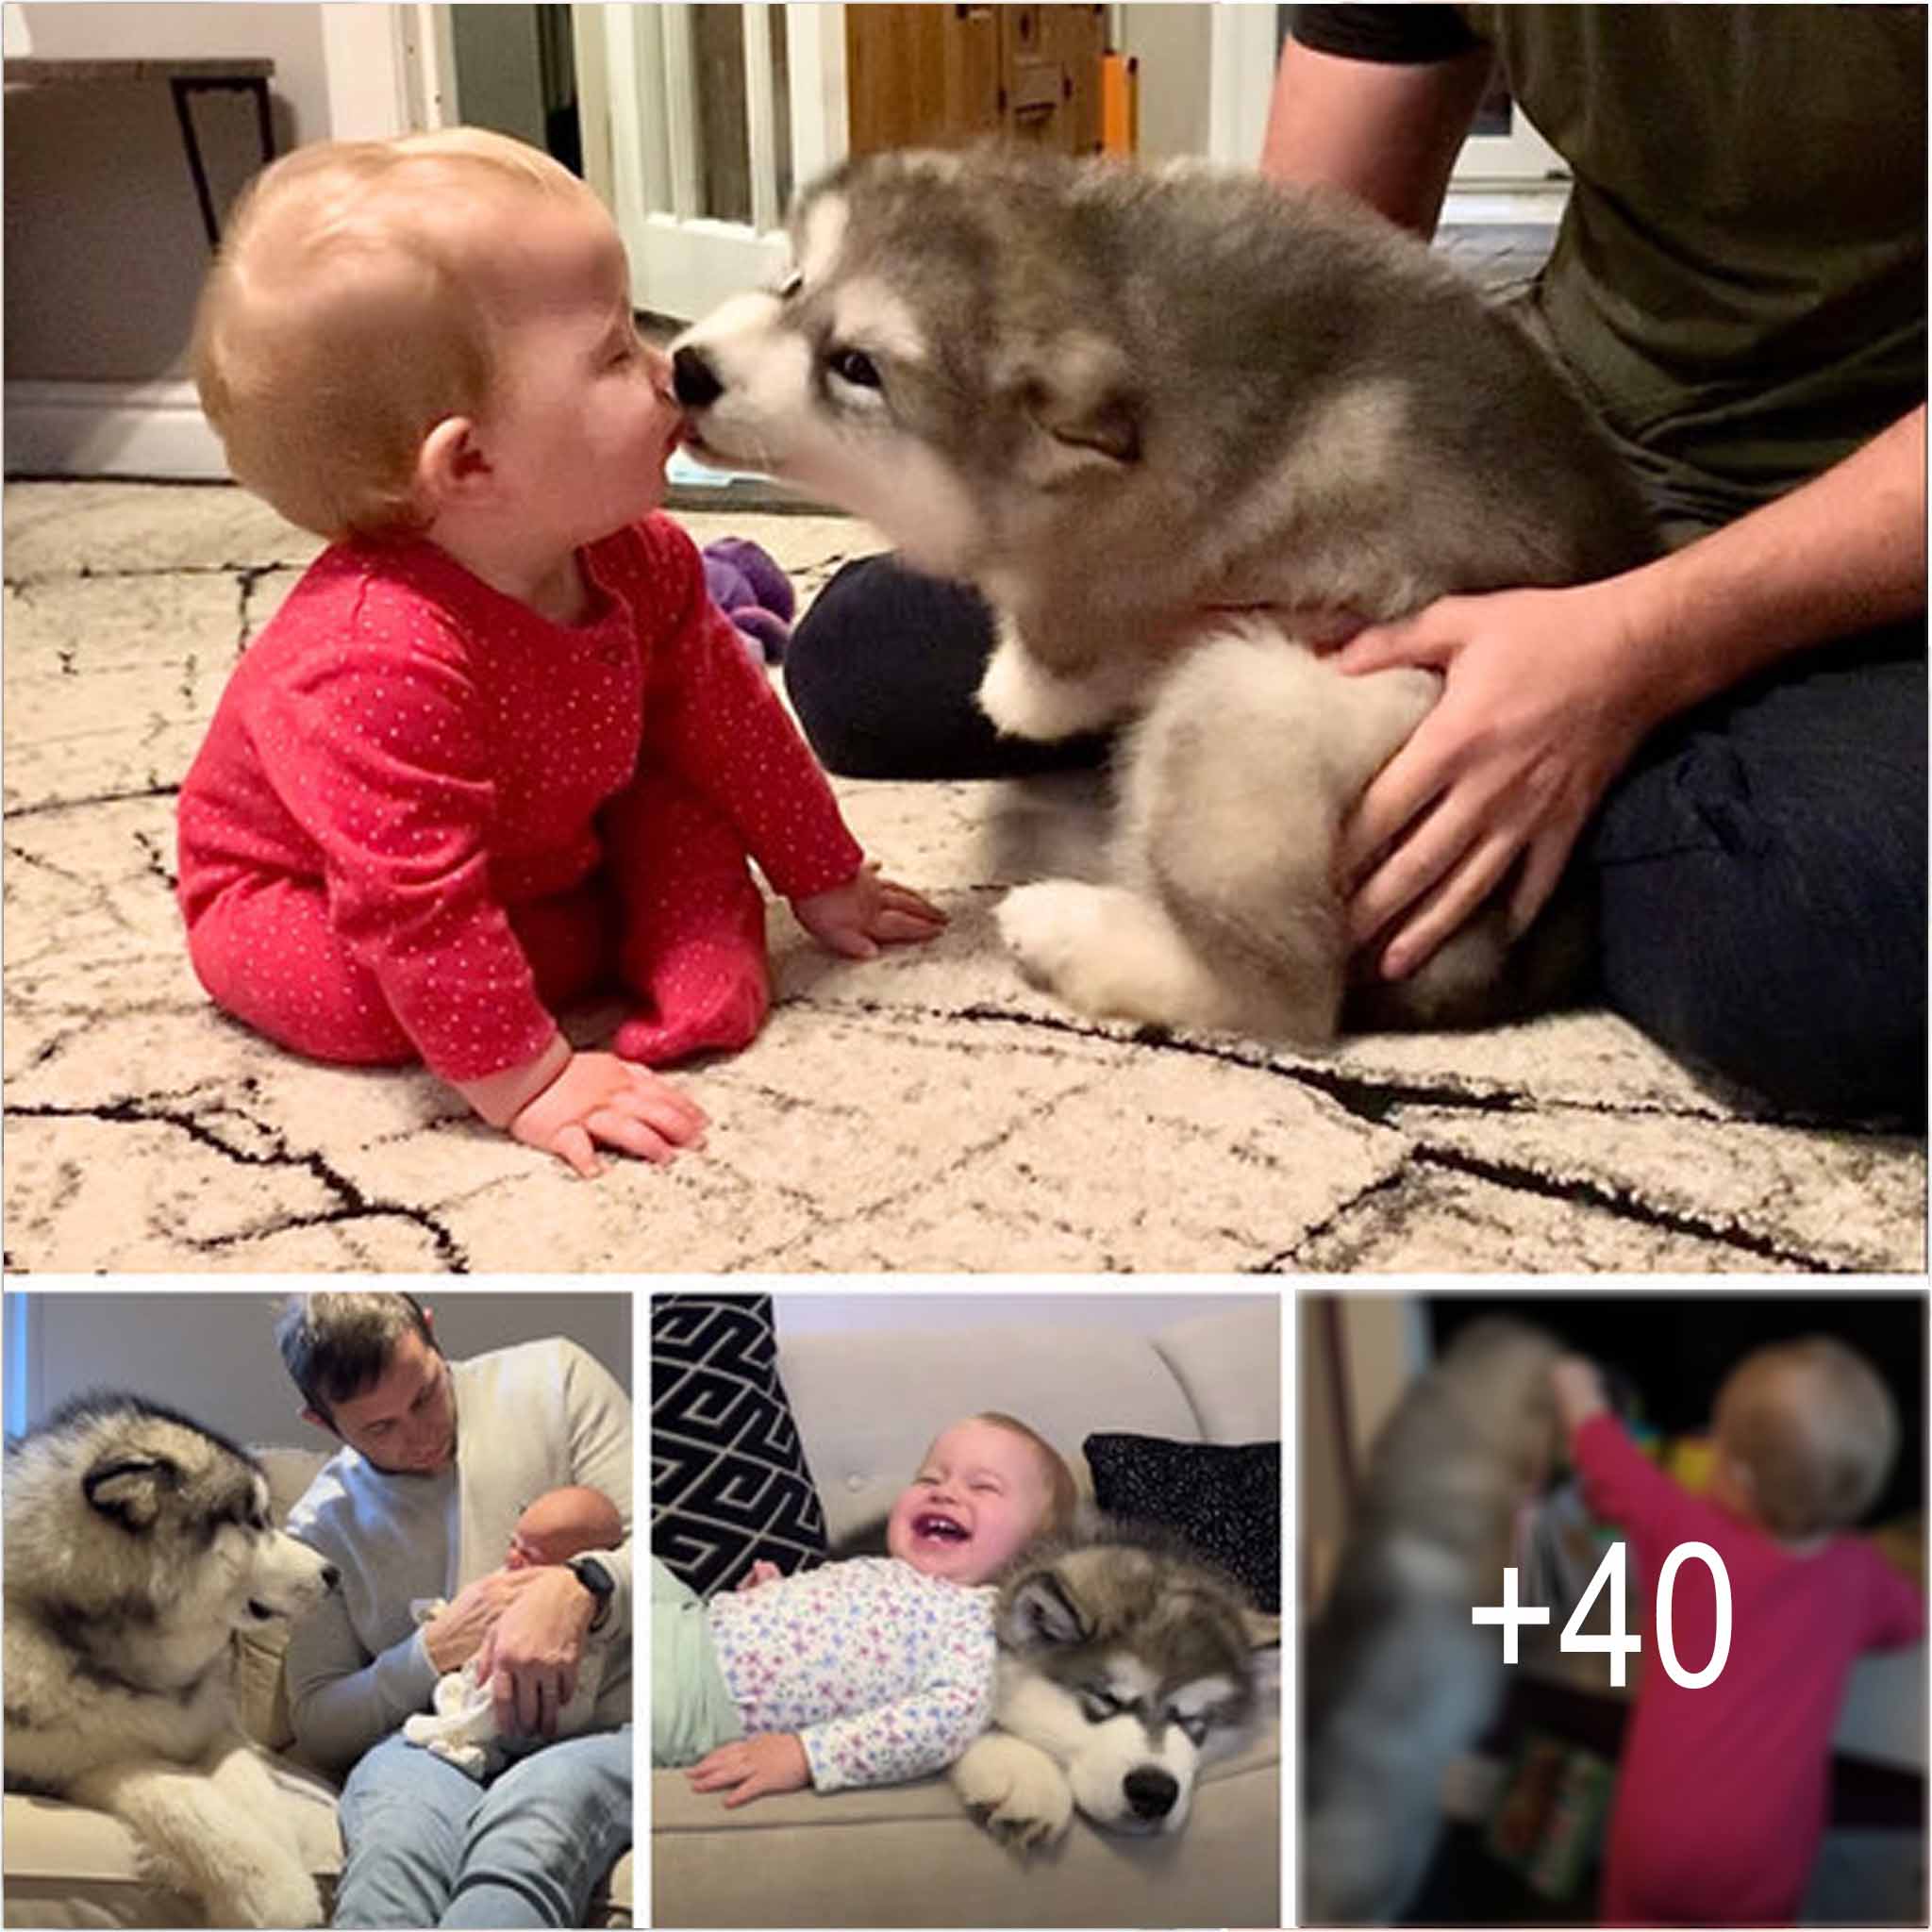 Unbreakable Bonds: Heartwarming Moments Between an Adorable Puppy and a Baby, Fostering a Love-Bound Connection